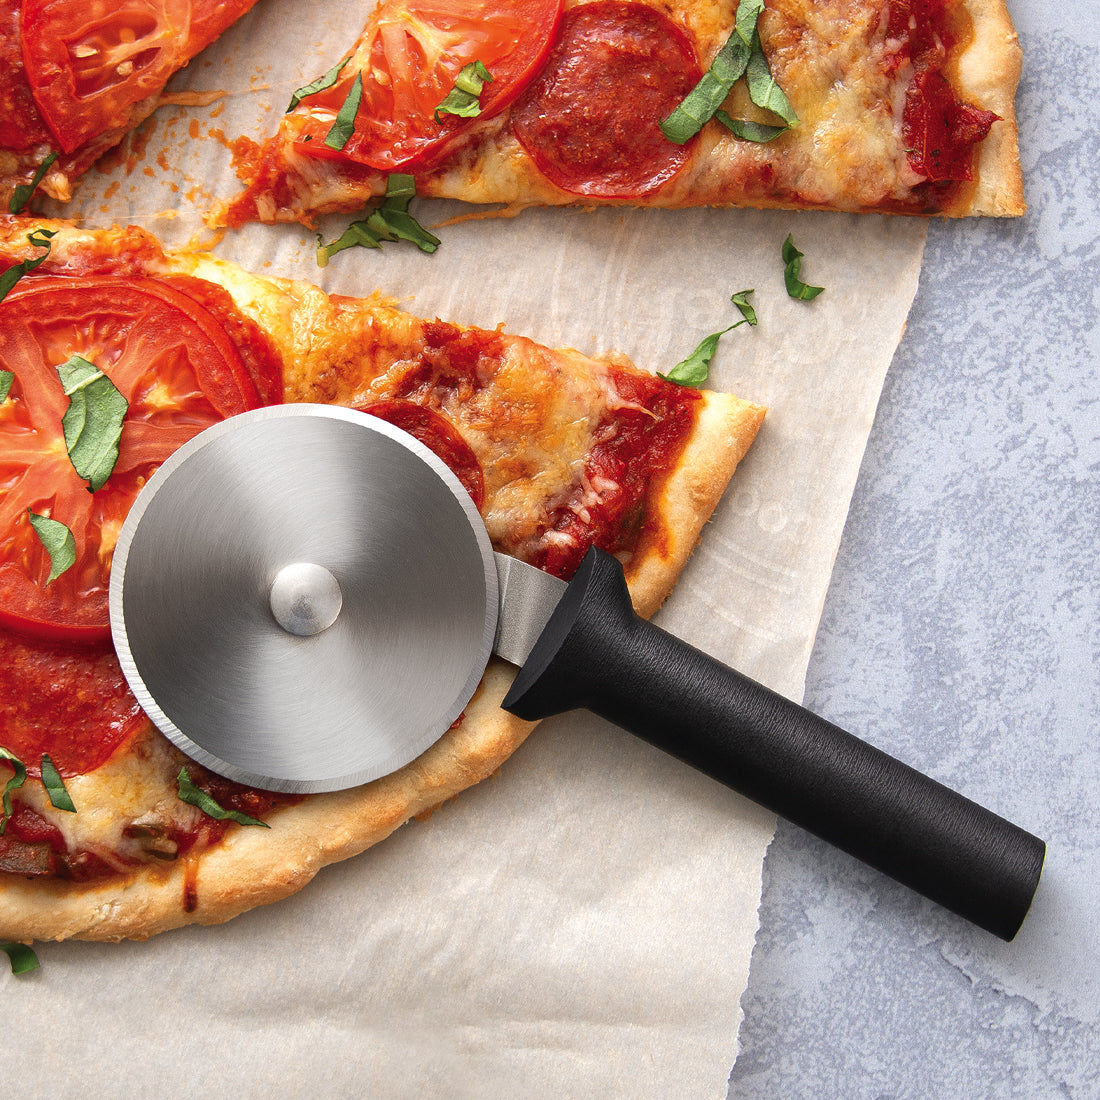 A silver handle Pizza Cutter next to a sliced pizza with tomatoes and pepperoni.